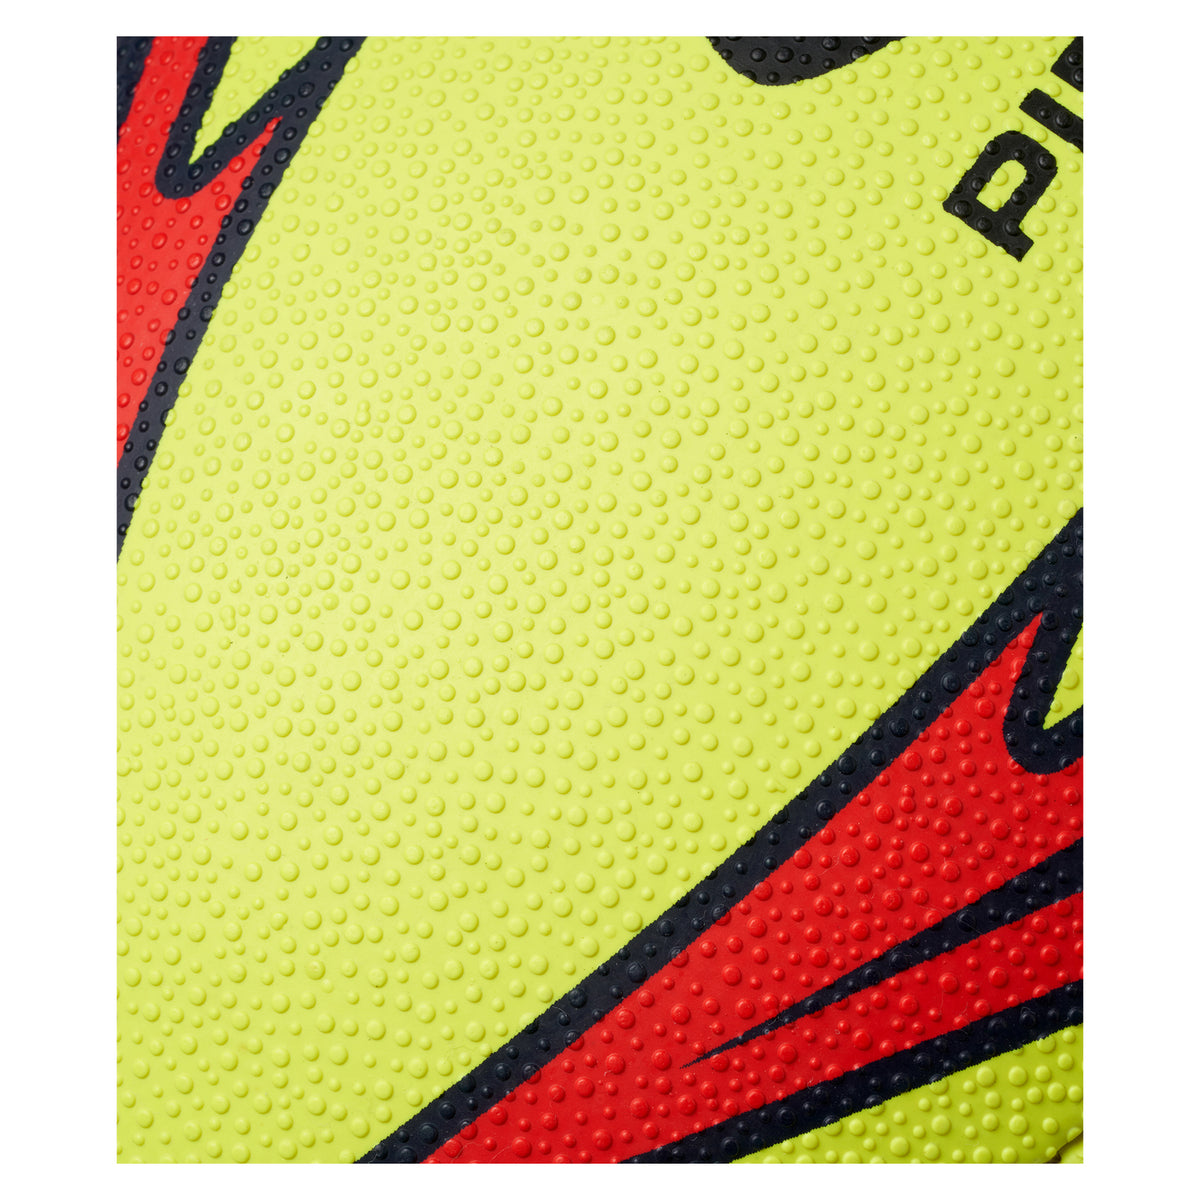 Piranha Warrior Xtreme Fluo Rugby Ball Size 5 (Pack of 10)